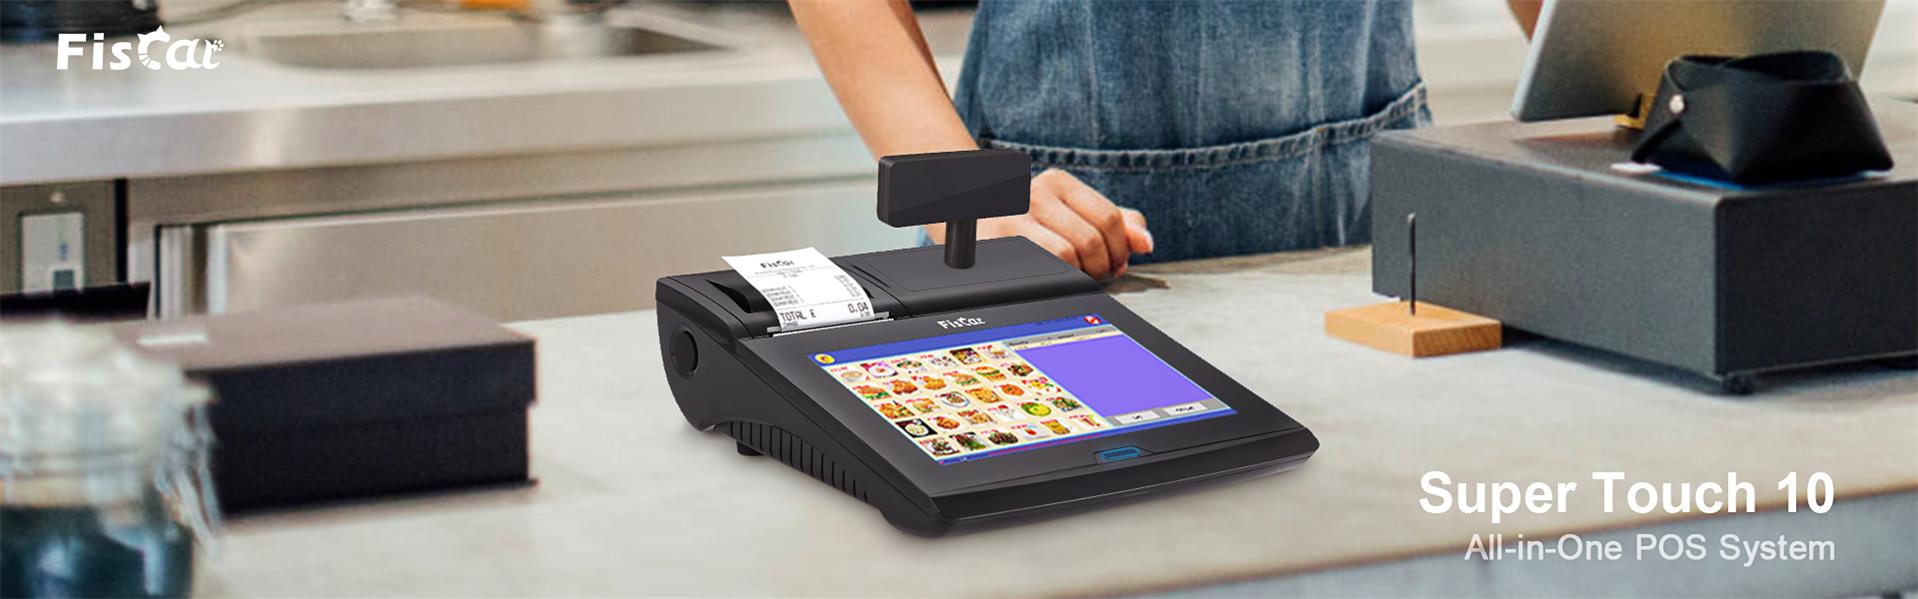 All-in-One POS System